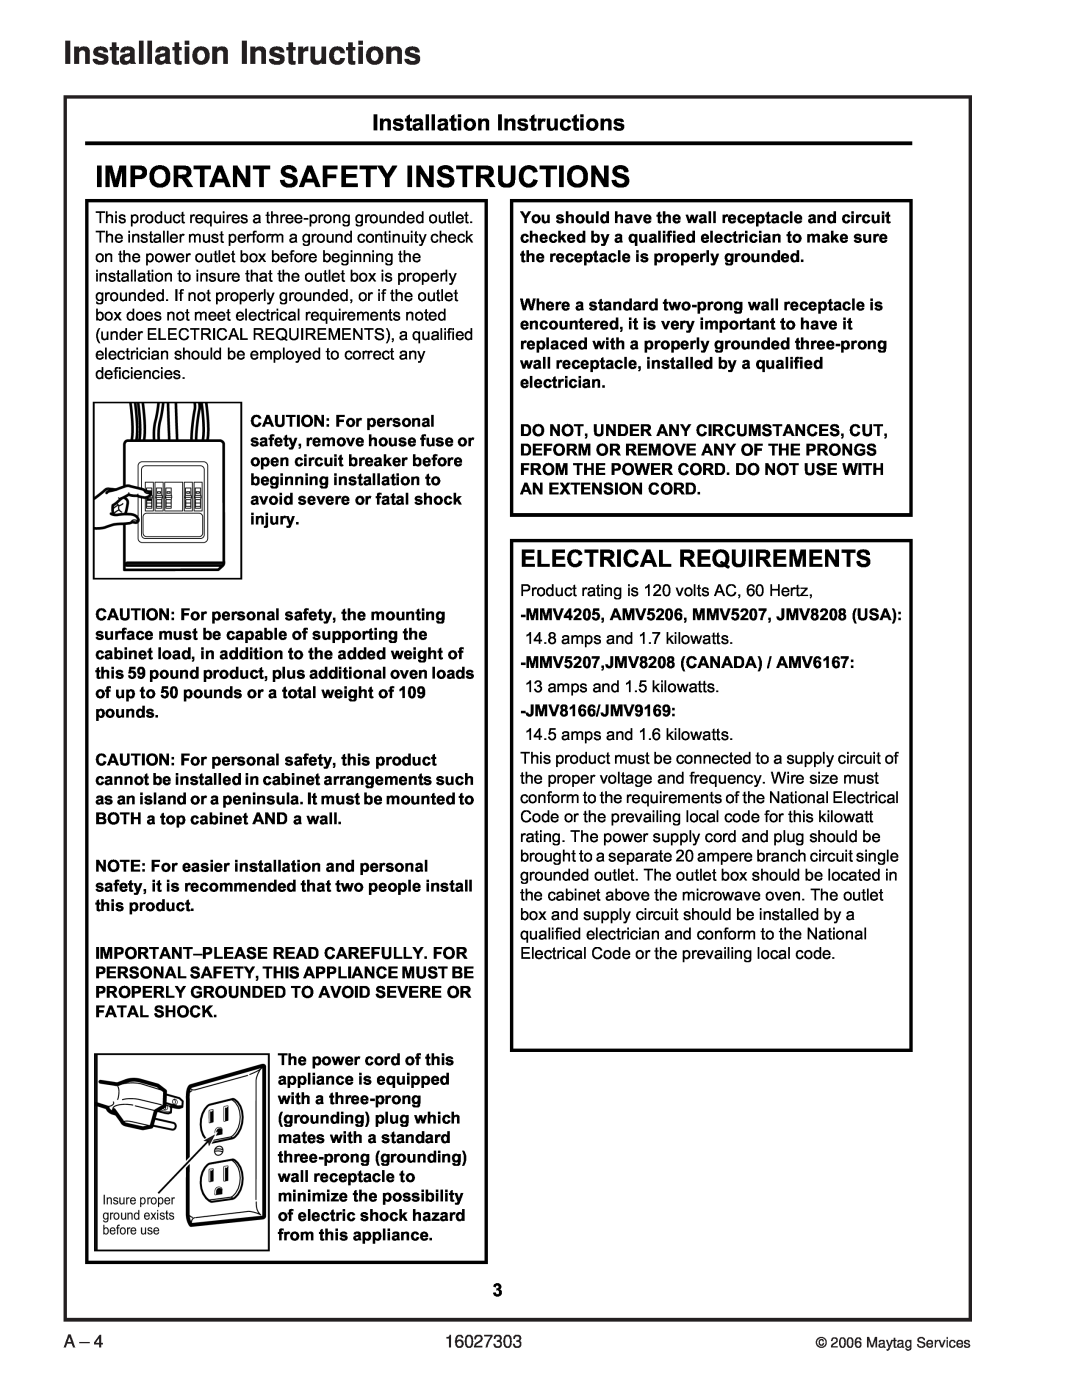 Maytag UMV1152CA manual Important Safety Instructions, Electrical Requirements, Installation Instructions 